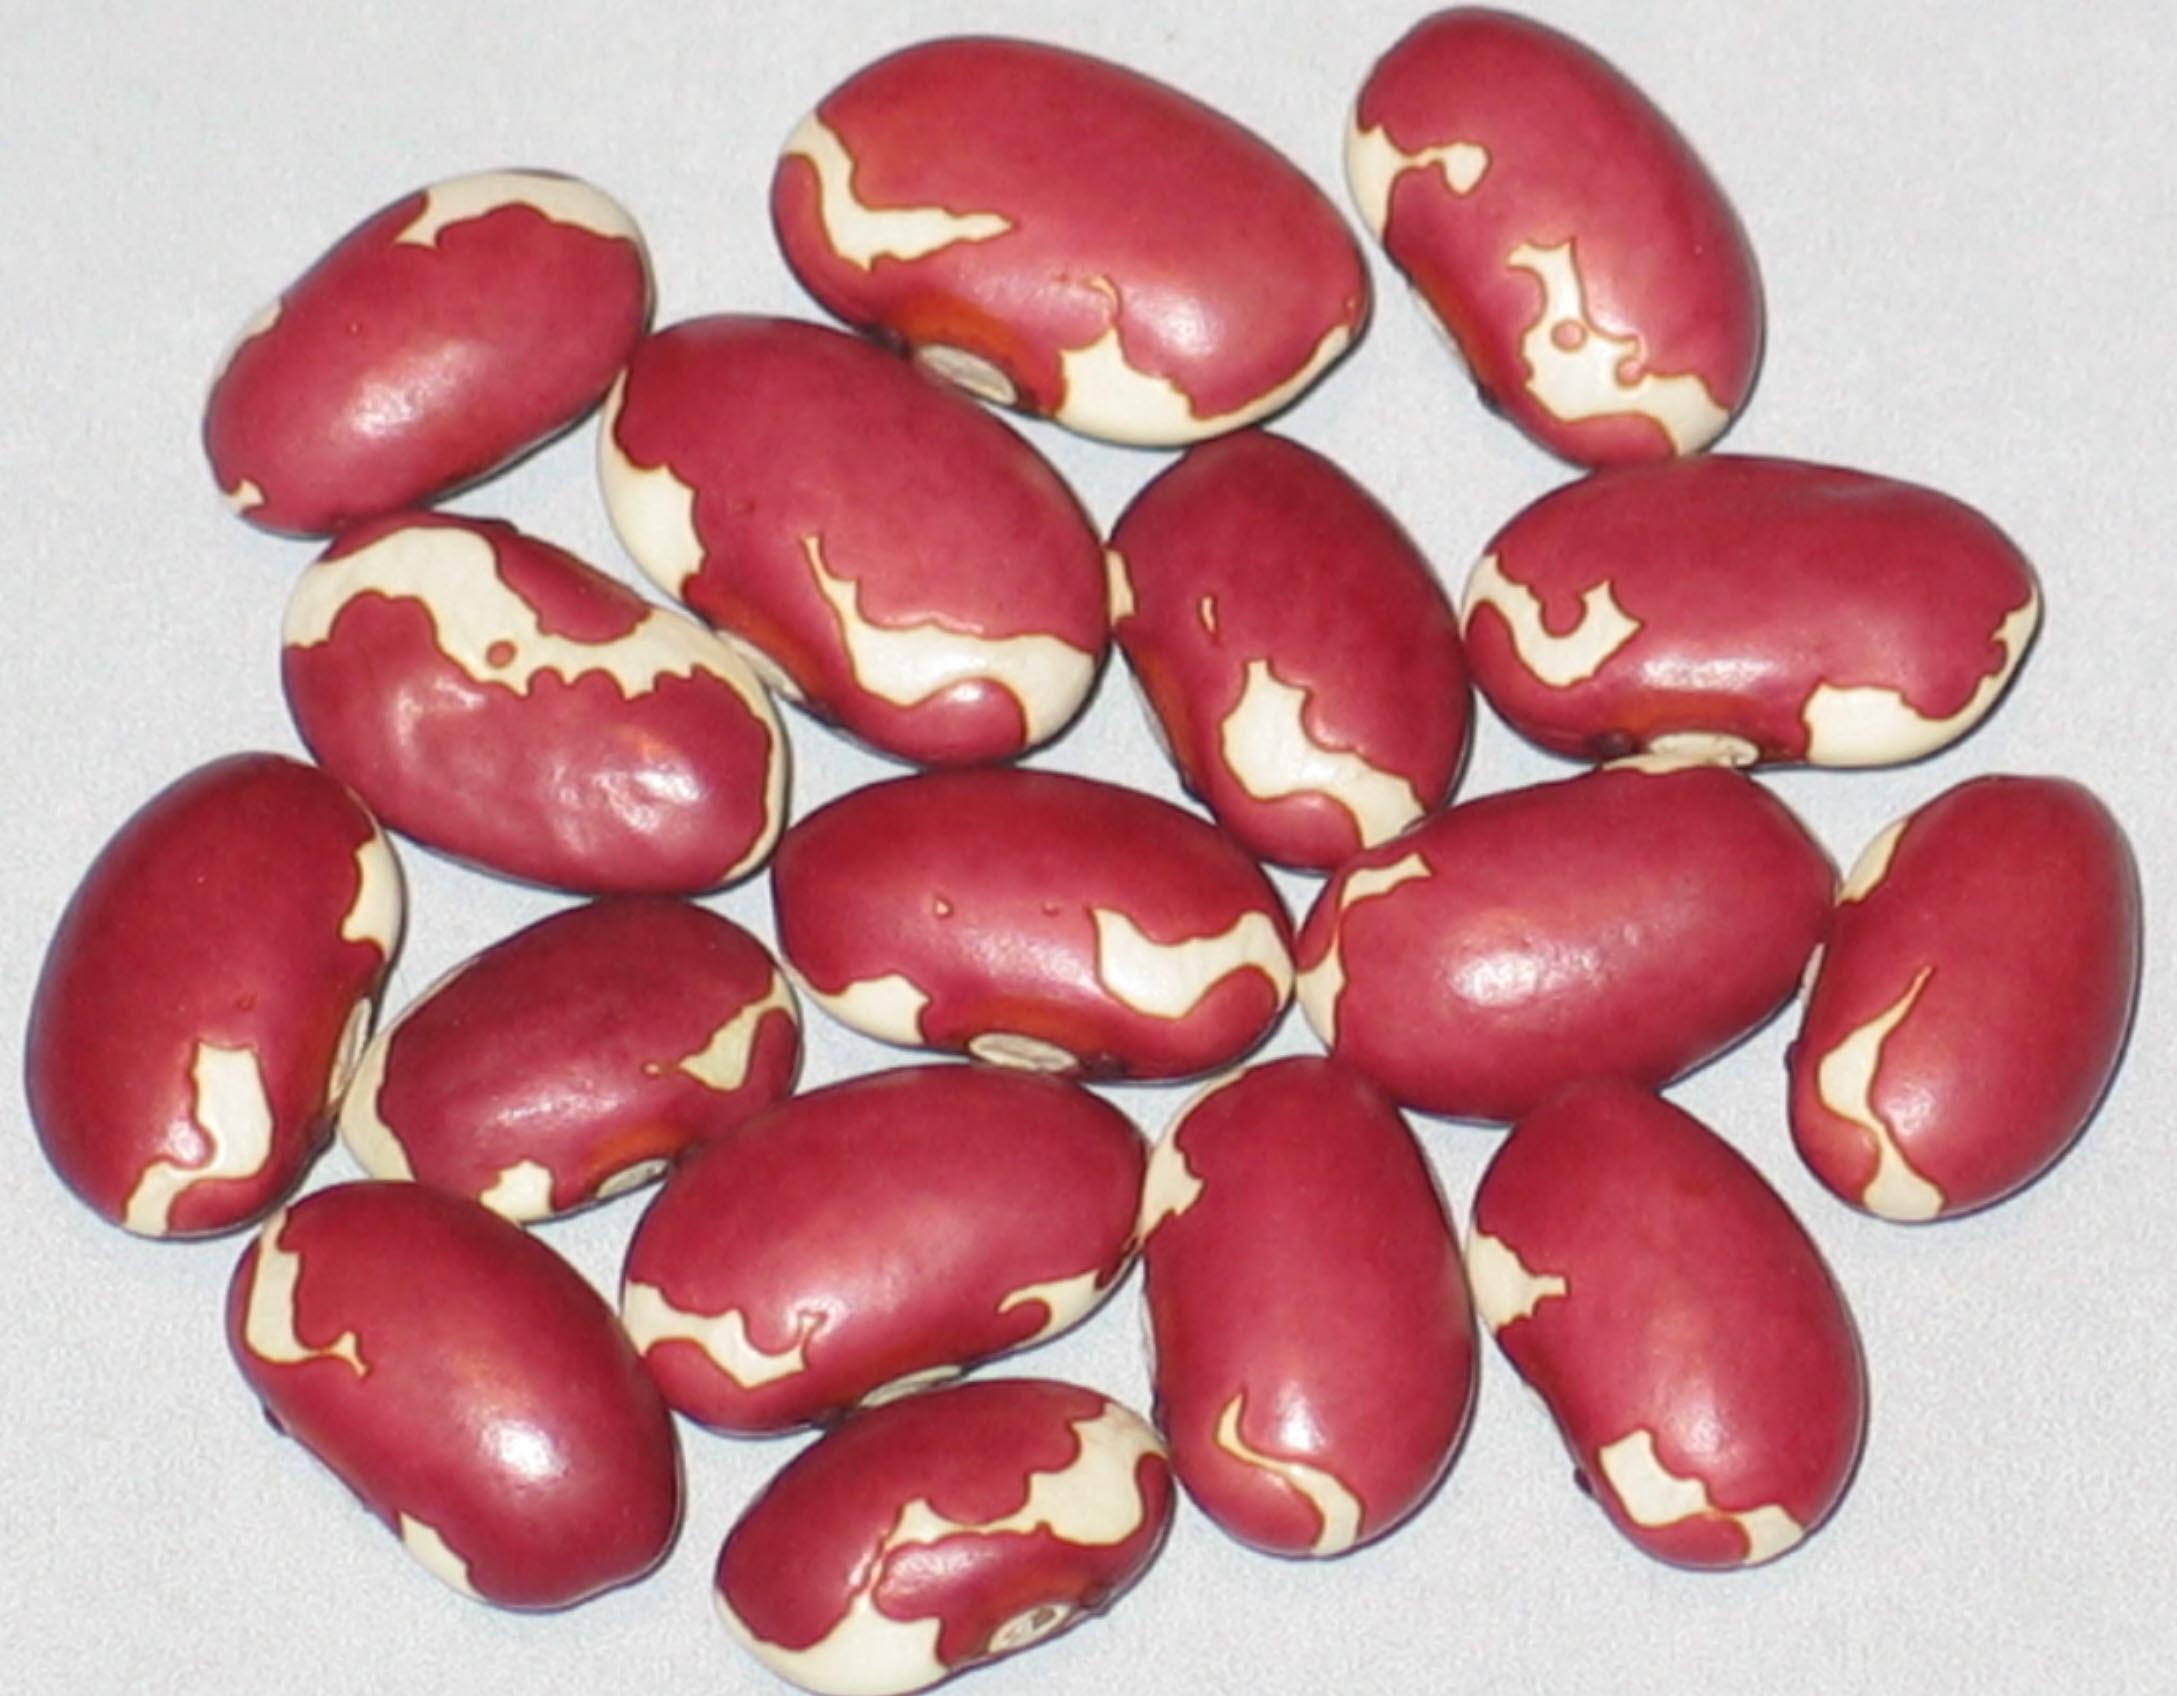 image of Holstein beans